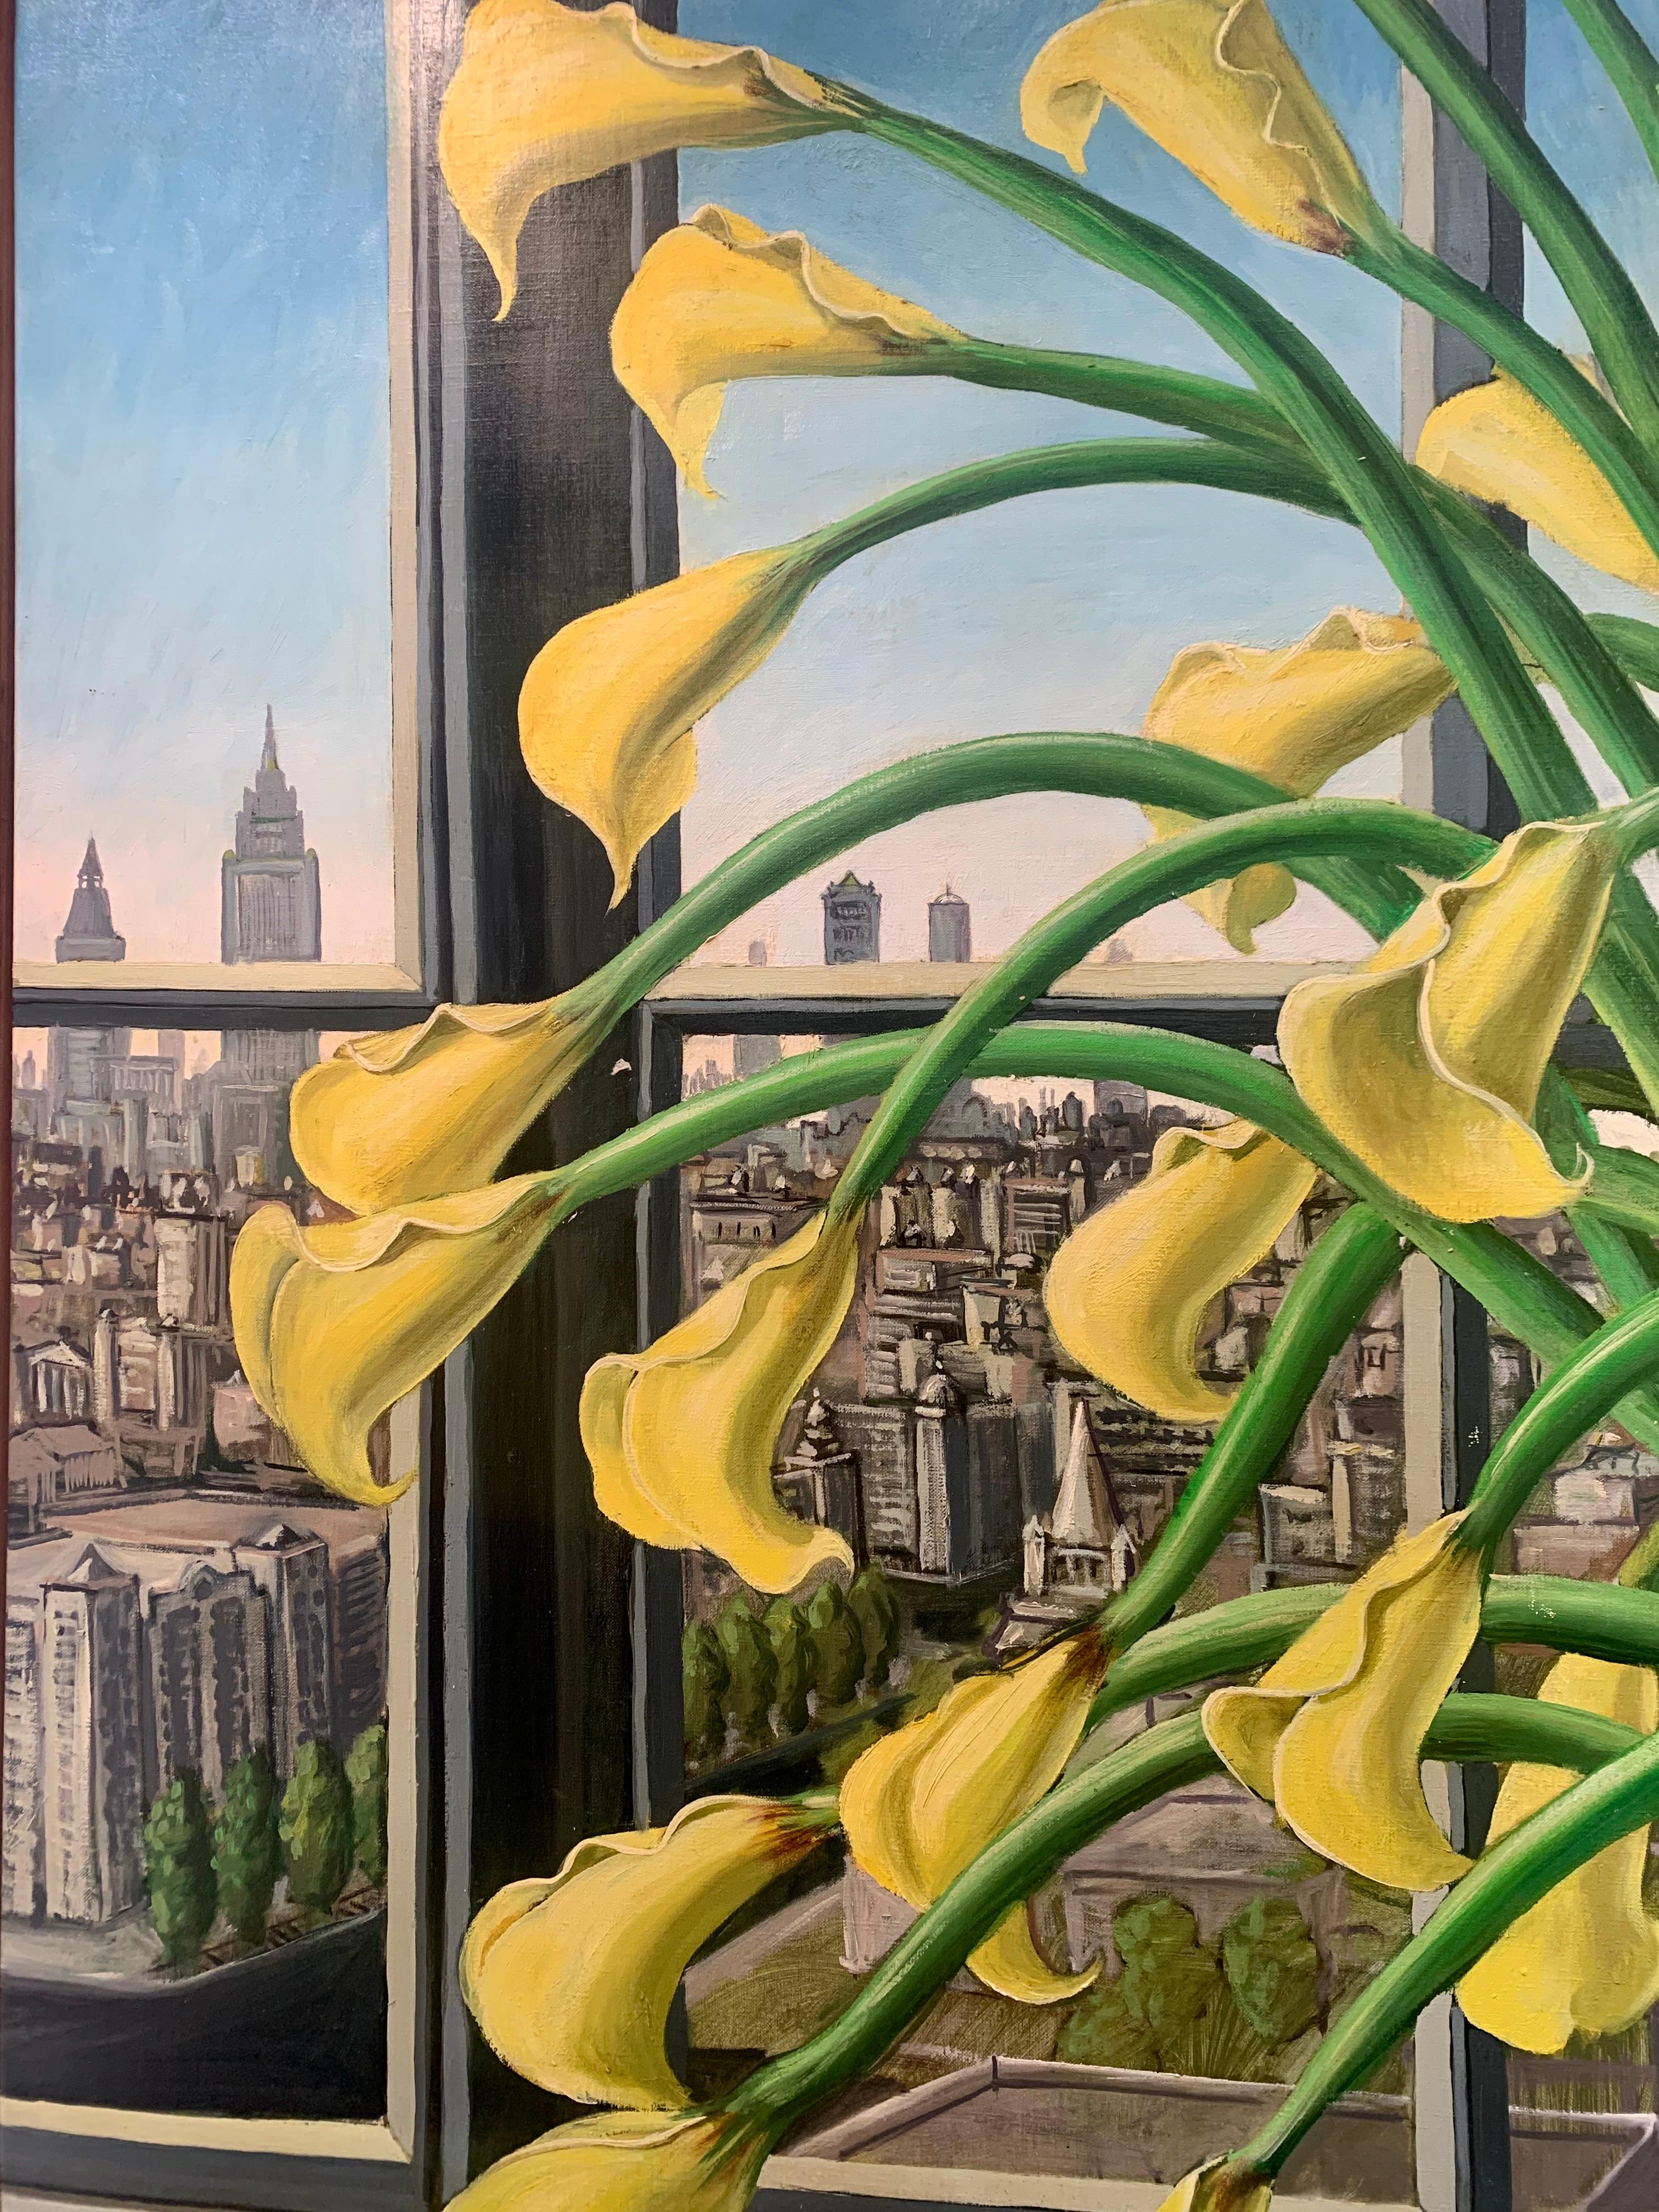  Large Yellow Lilies By The Window In New York  - Modern Photograph by Rafael Saldarriaga